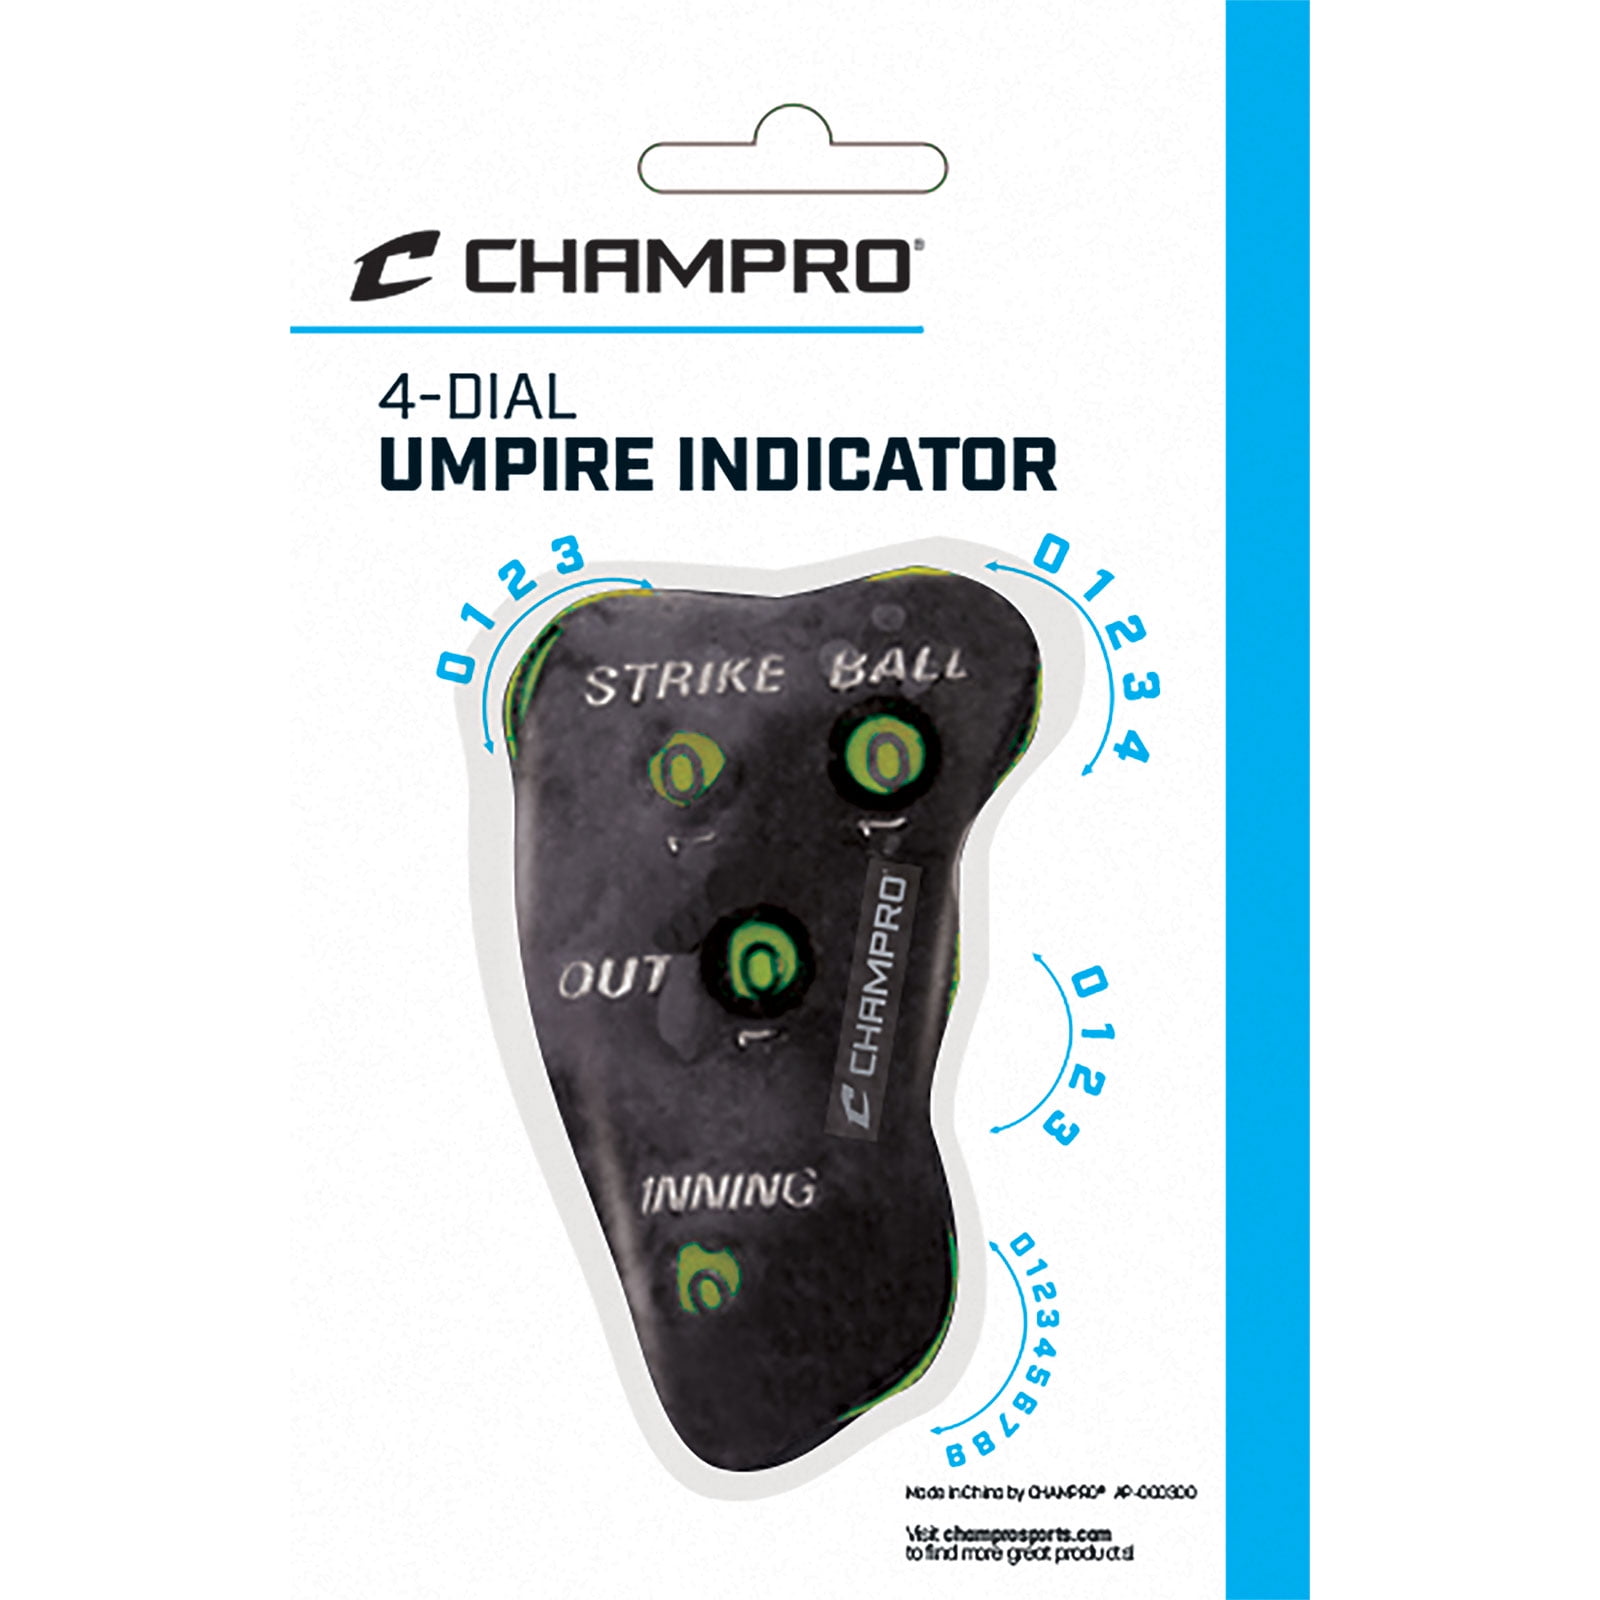 Champro Push Button Sports Pitch Counter for sale online 